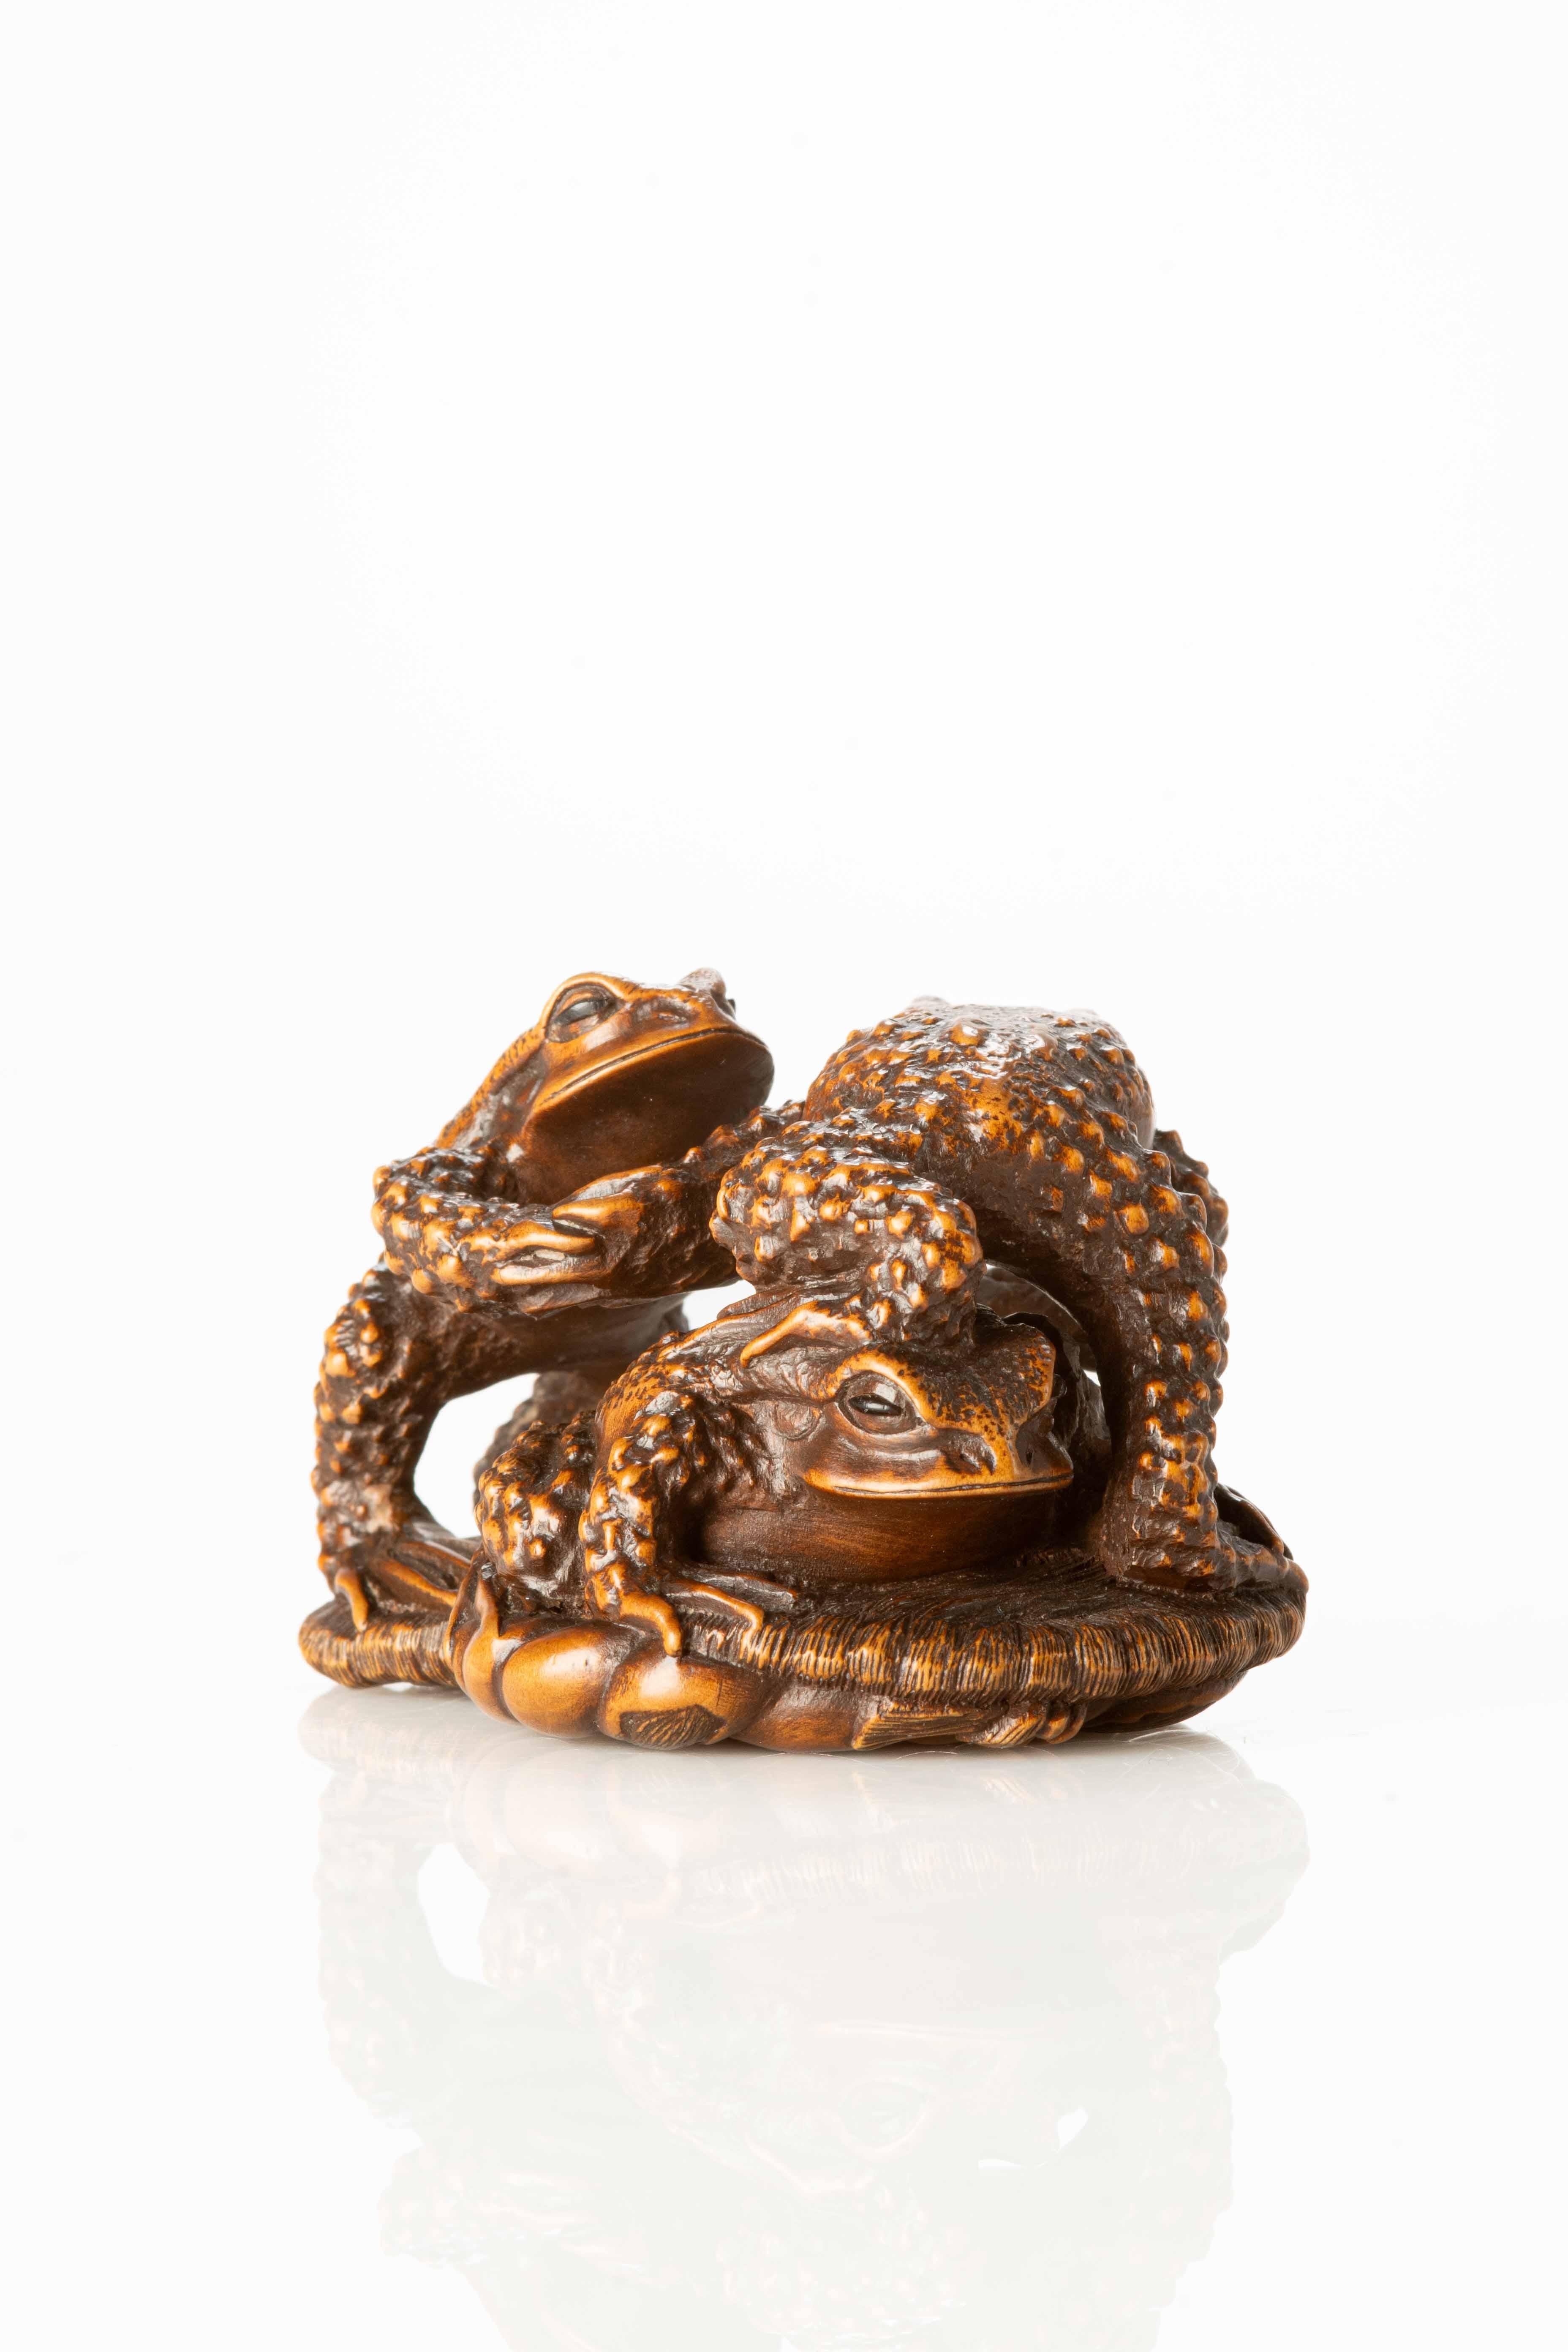 Hand-Crafted A Japanese boxwood netsuke depicting three toads on a sandal